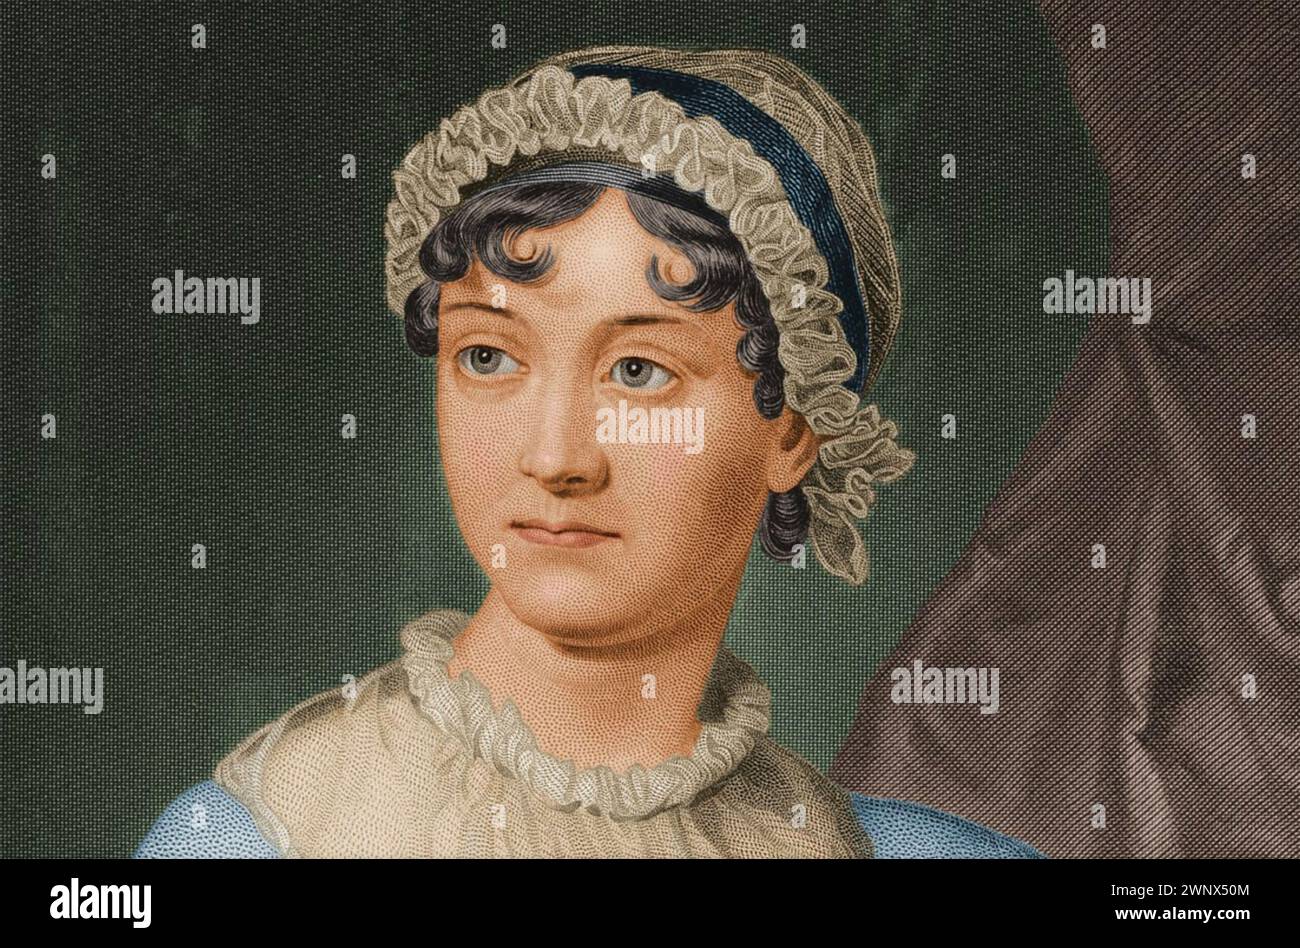 JANE AUSTEN (1775-1817) English novelist in an imager based on a memoir of her life published in 1871 and in turn based on  an earlier sketch Stock Photo